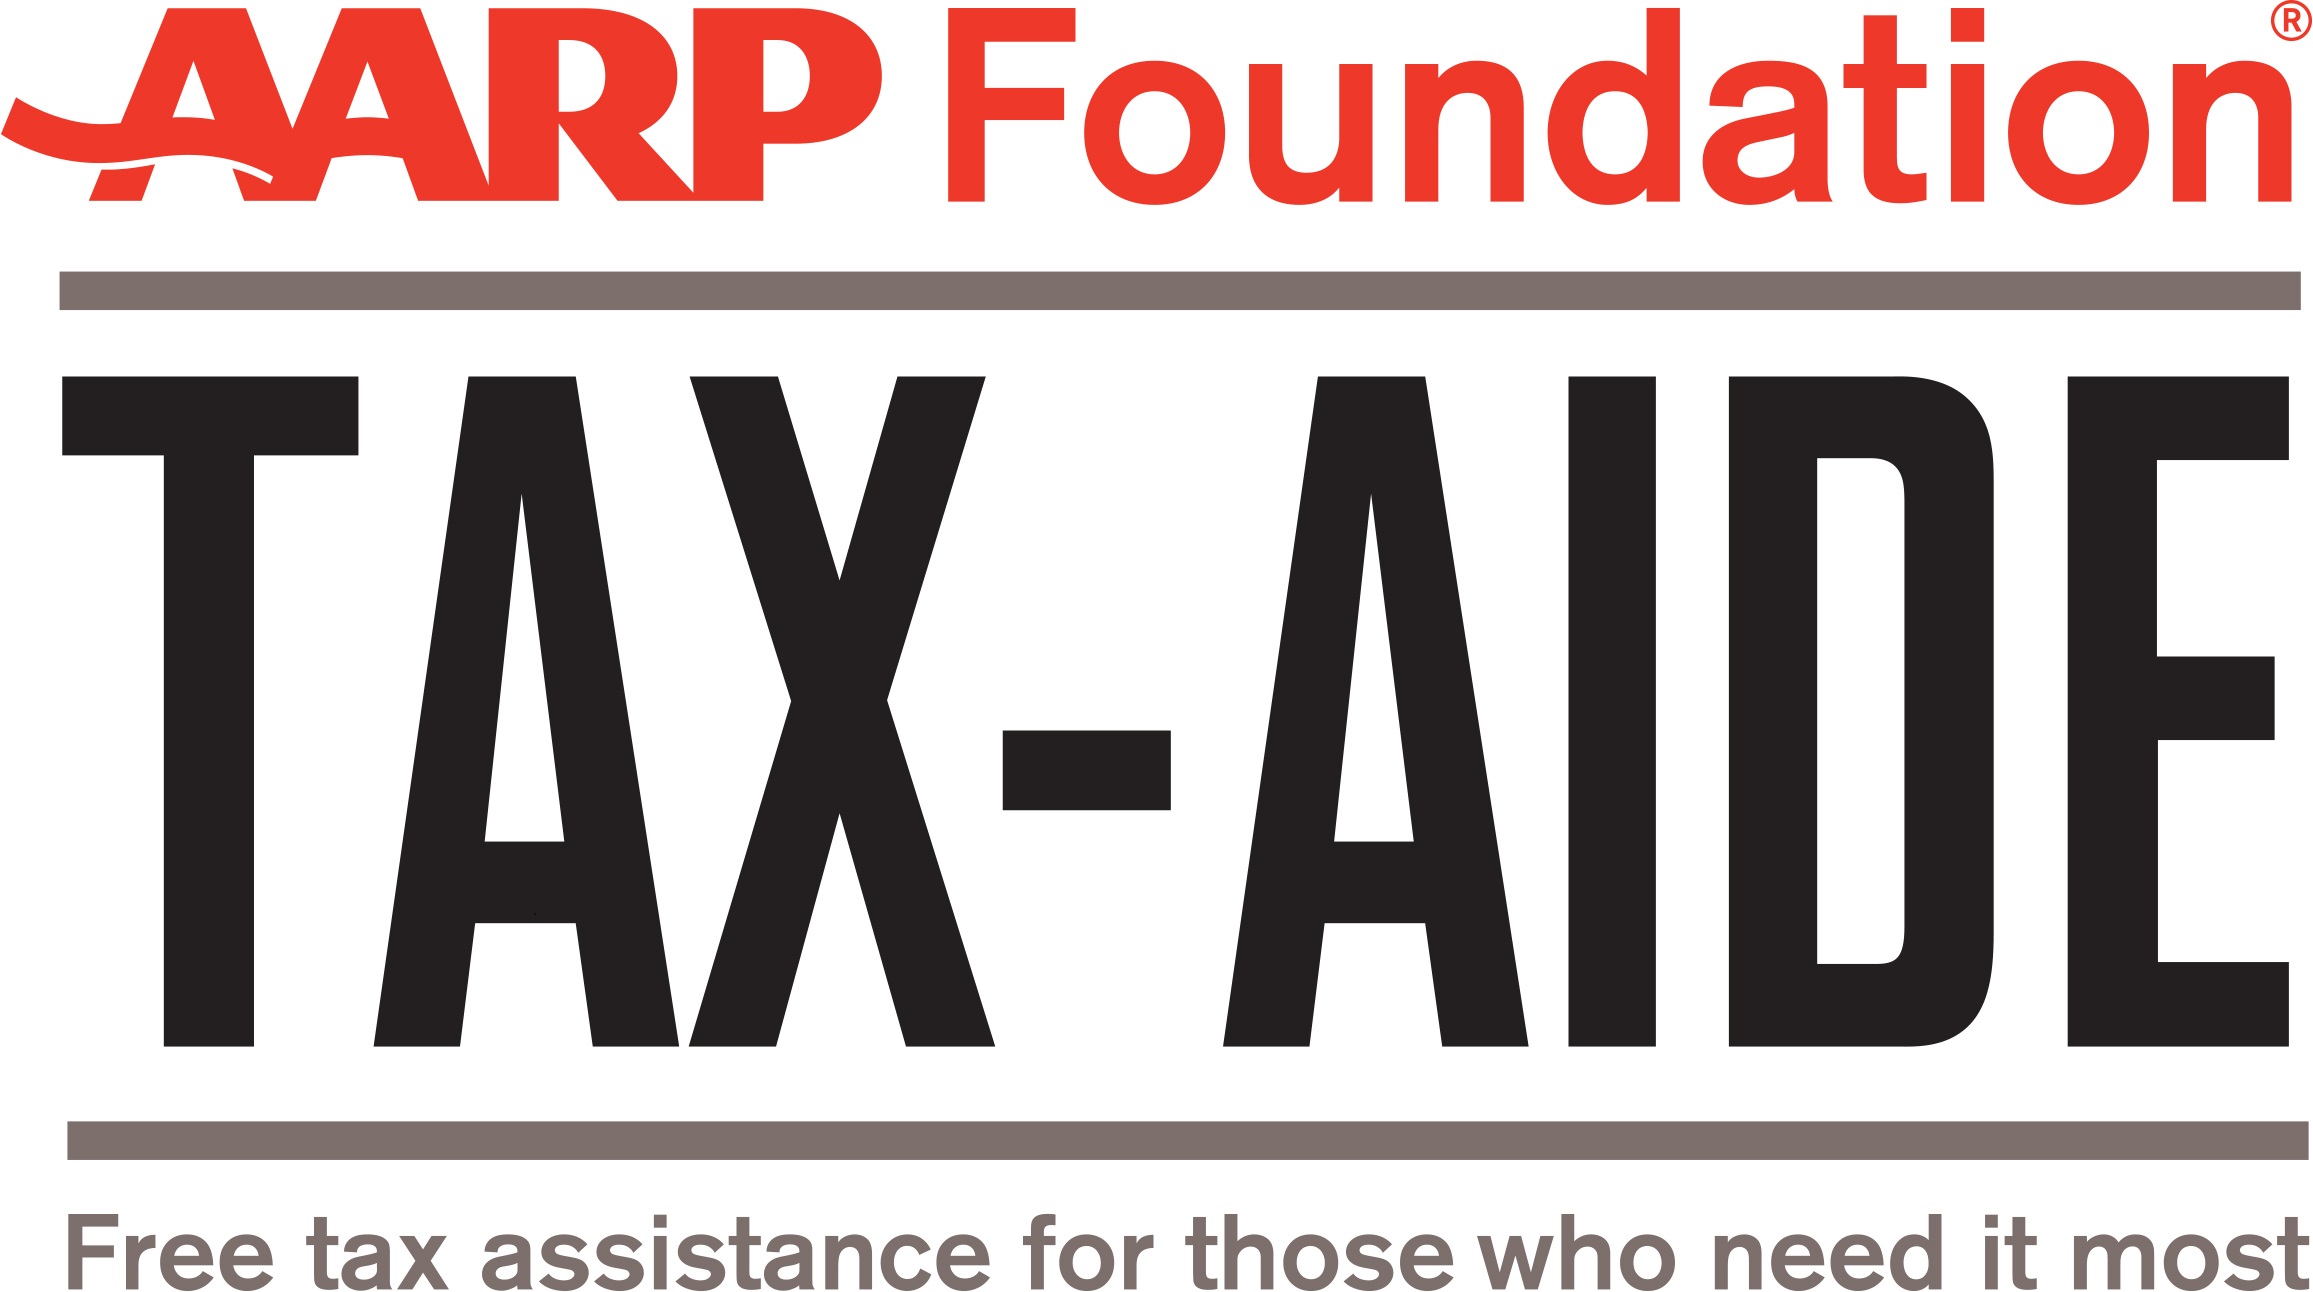 You’ve Got What It Takes: Volunteer with AARP Foundation Tax-Aide